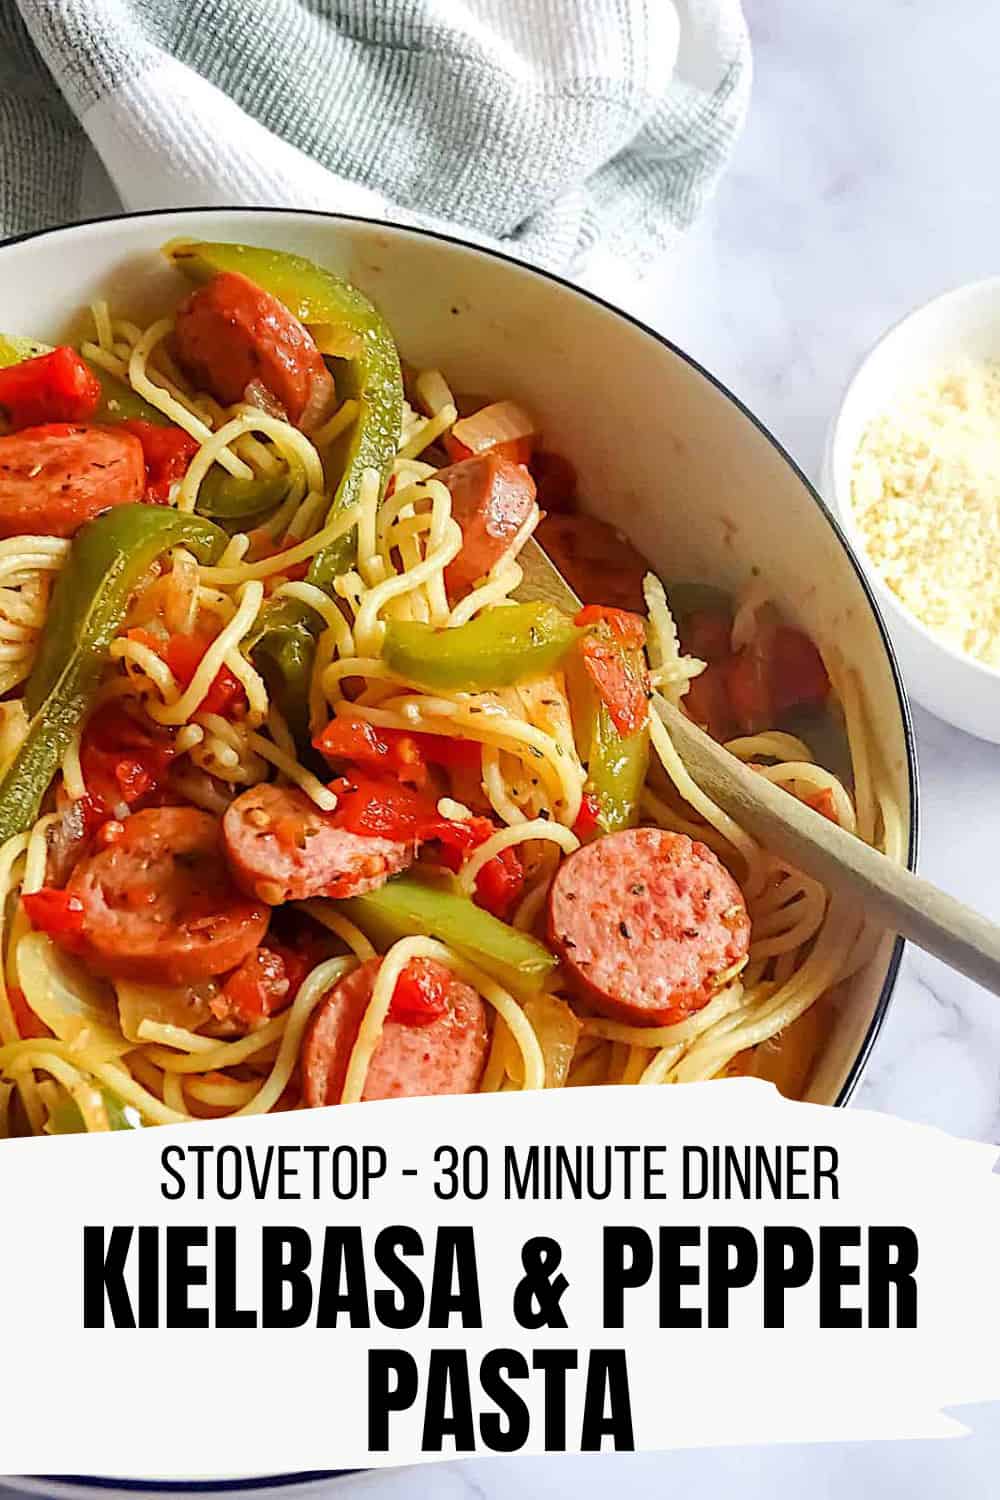 Kielbasa and Pepper Pasta with Tomatoes